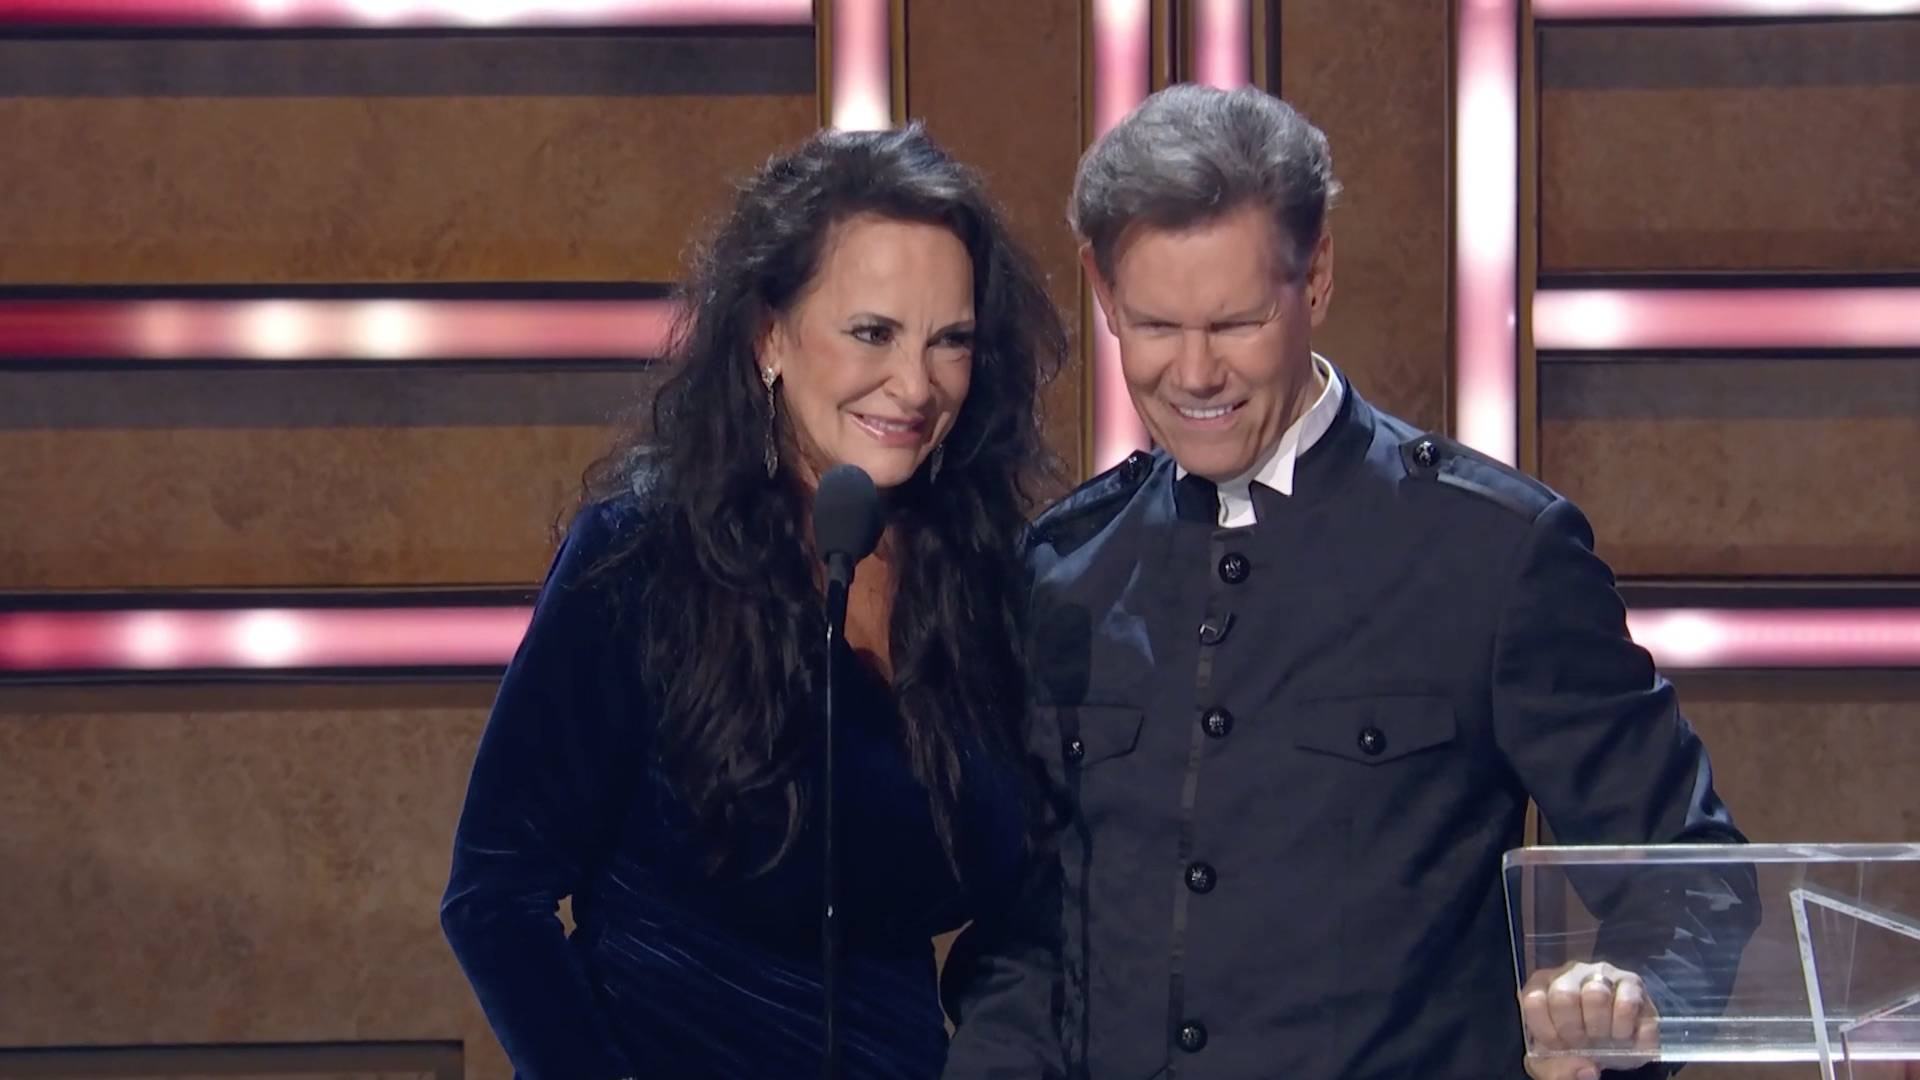 Randy and Mary Travis being honored at CMT Artists of the Year 2021.